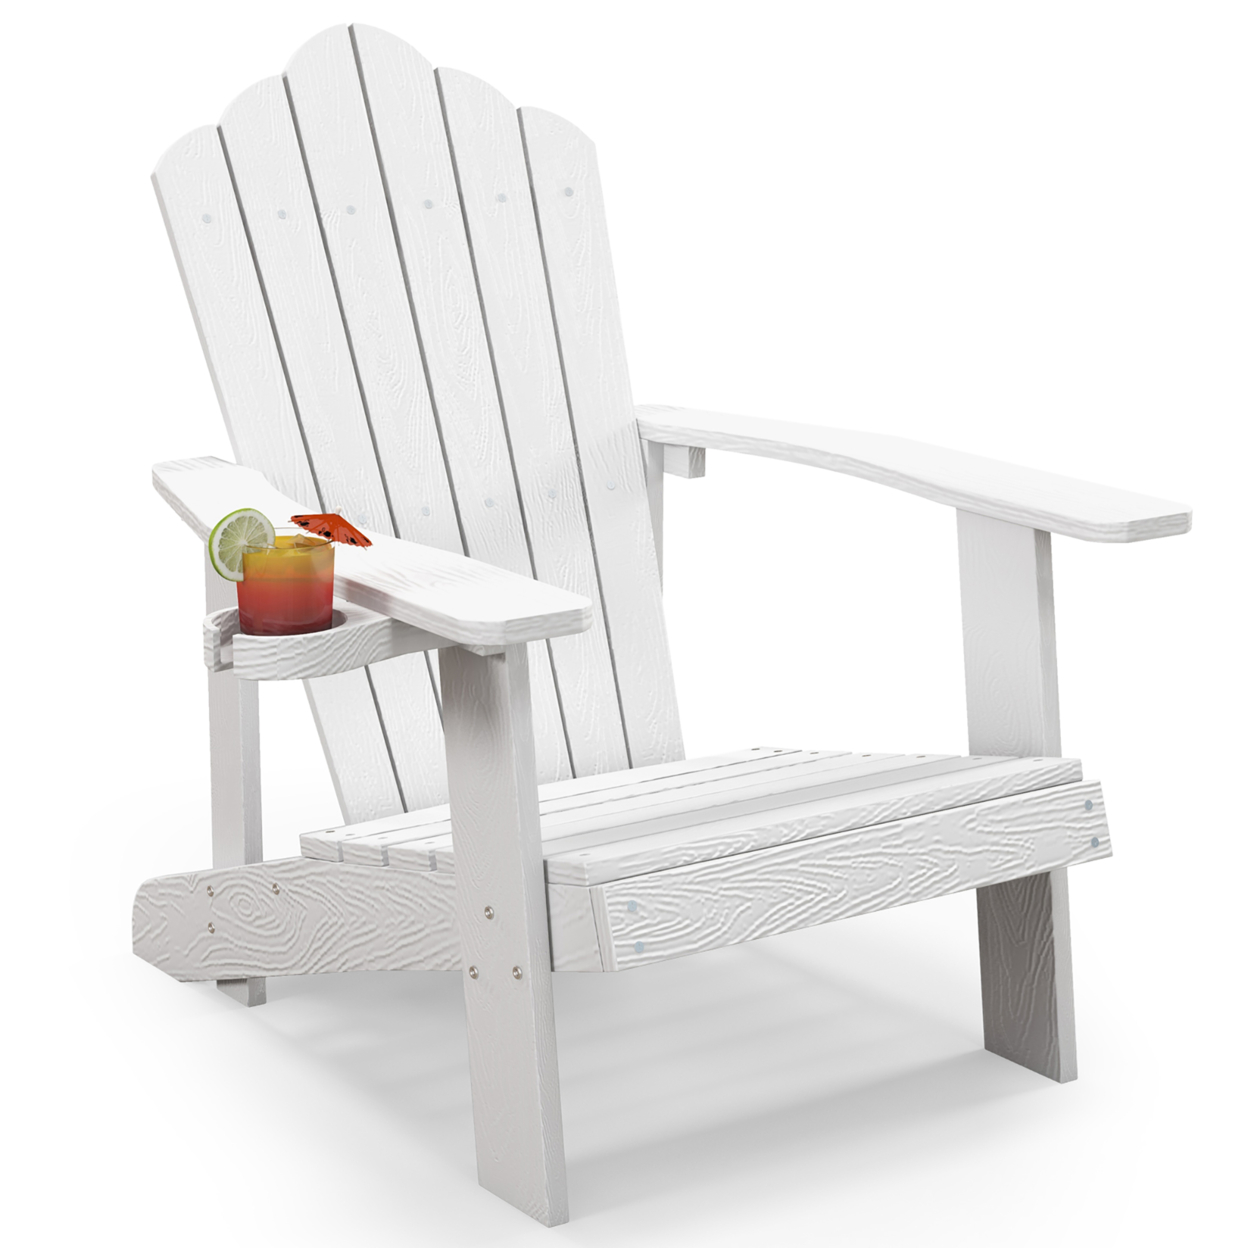 Patio HIPS Outdoor Weather Resistant Slatted Chair Adirondack Chair W/ Cup Holder - White